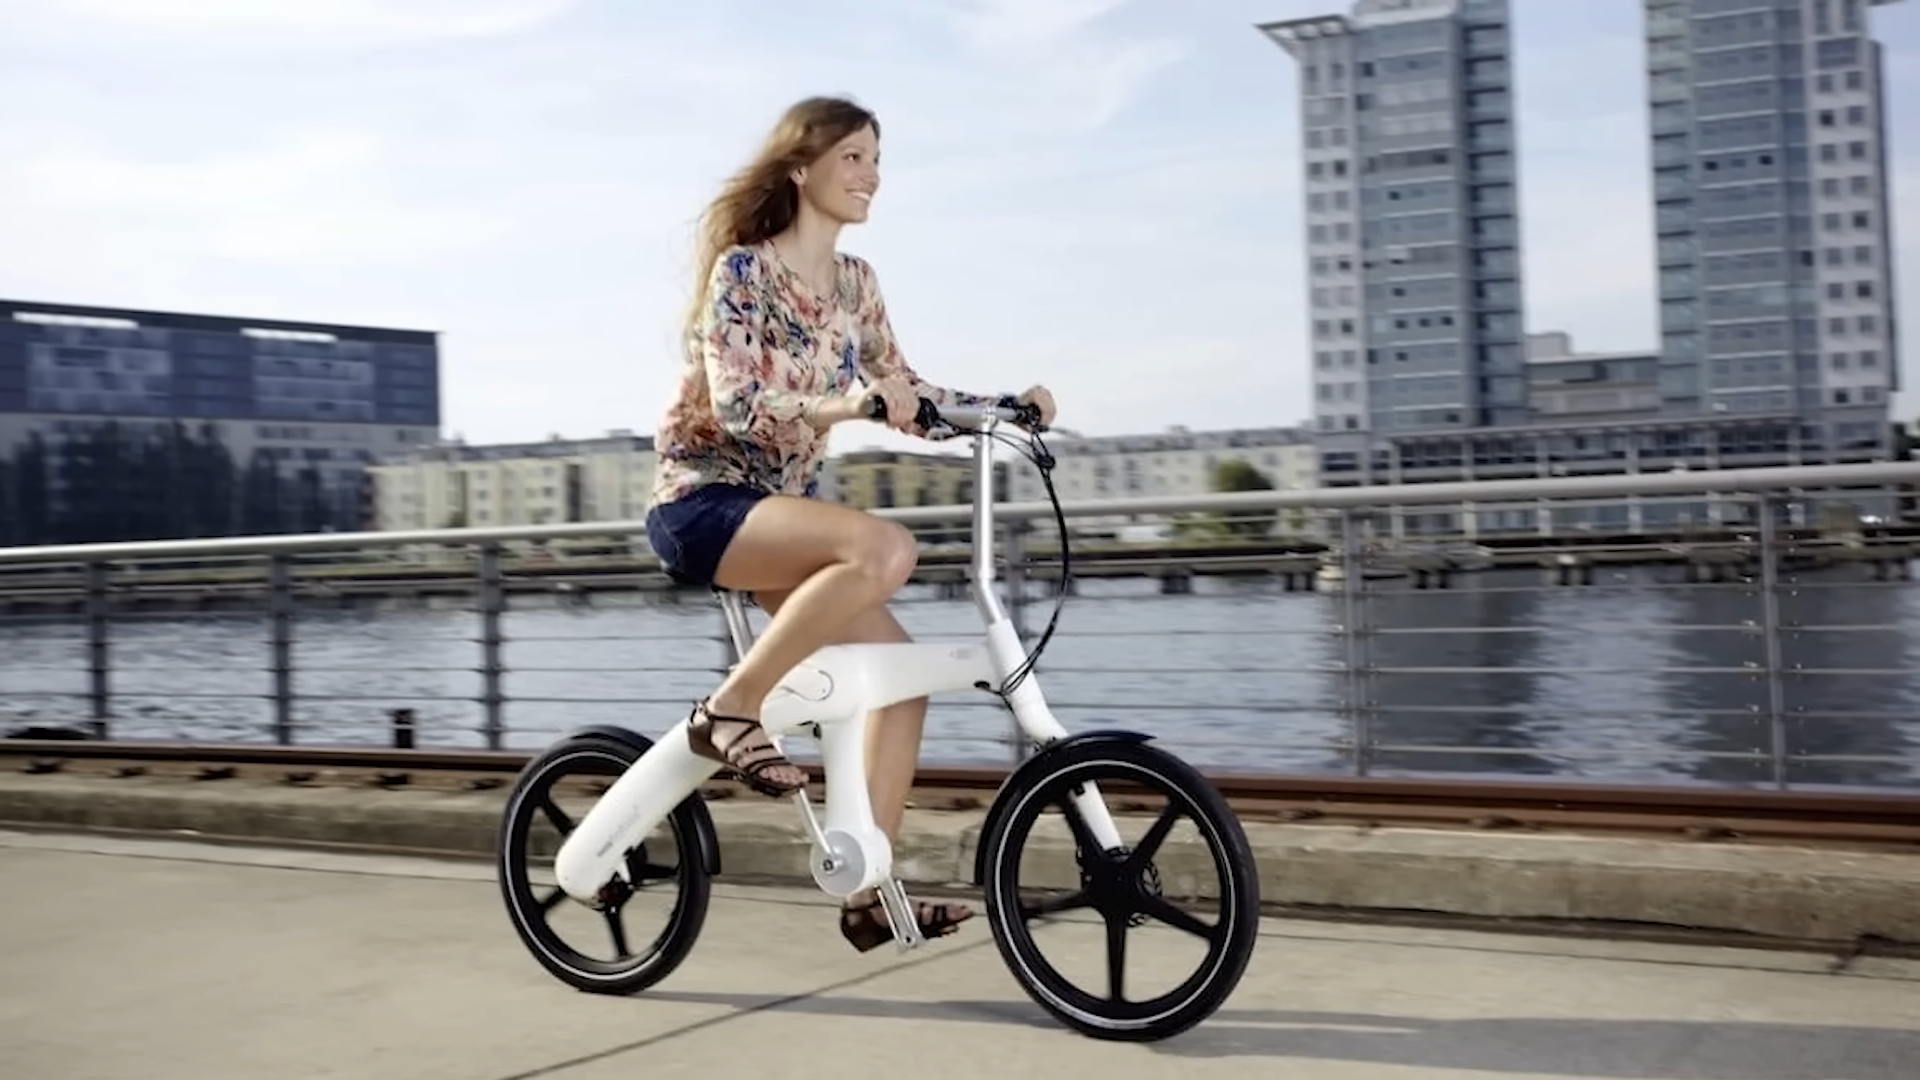 Chainless “Digital Drive” Bikes Use Electric Power Transmission Instead